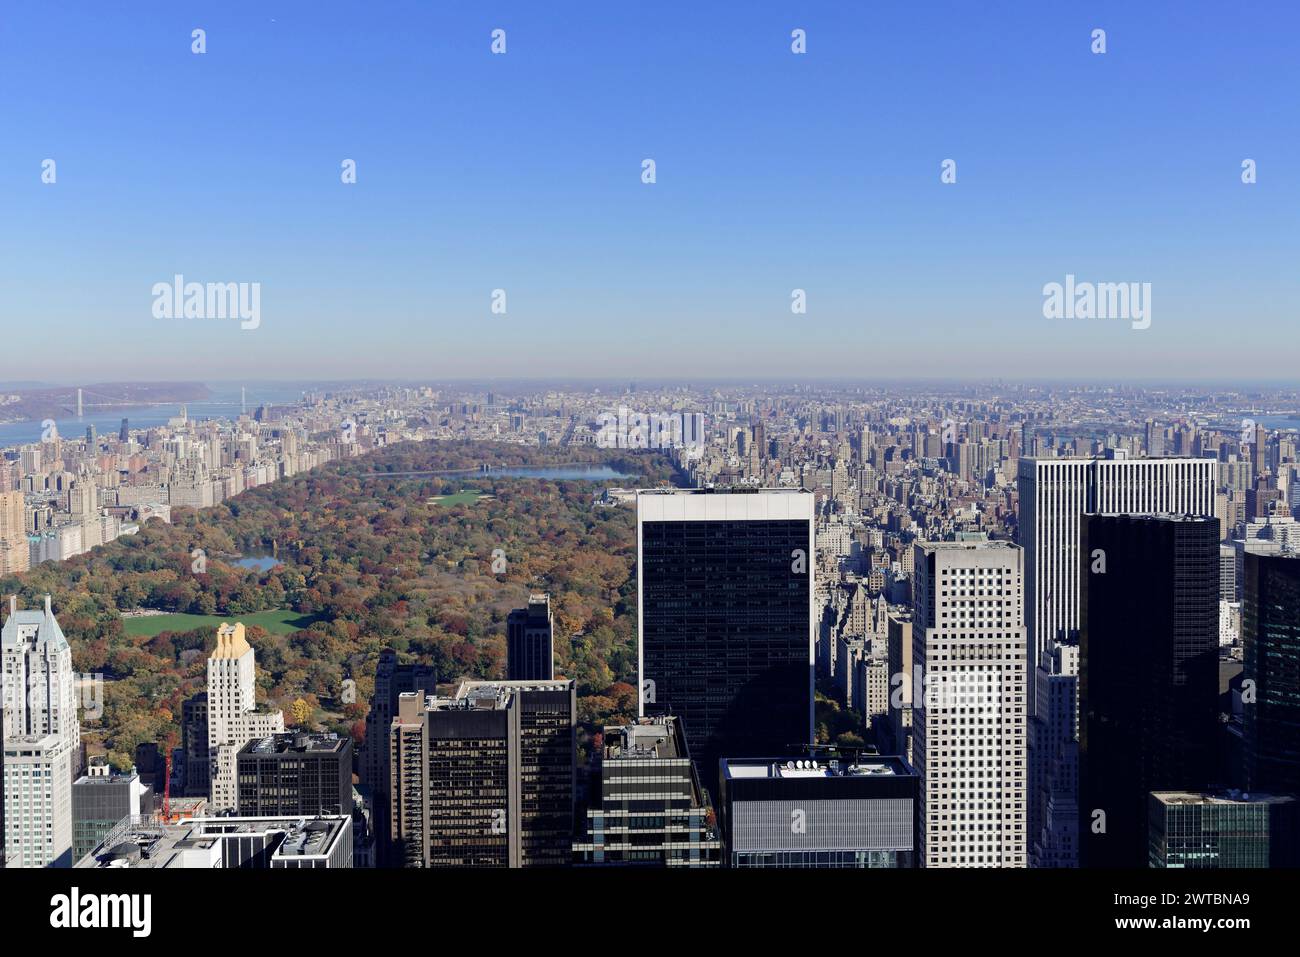 Rockefeller Center observation deck, view of skyscrapers in front of Central Park with autumn trees under clear blue sky, Manhattan, New York City Stock Photo